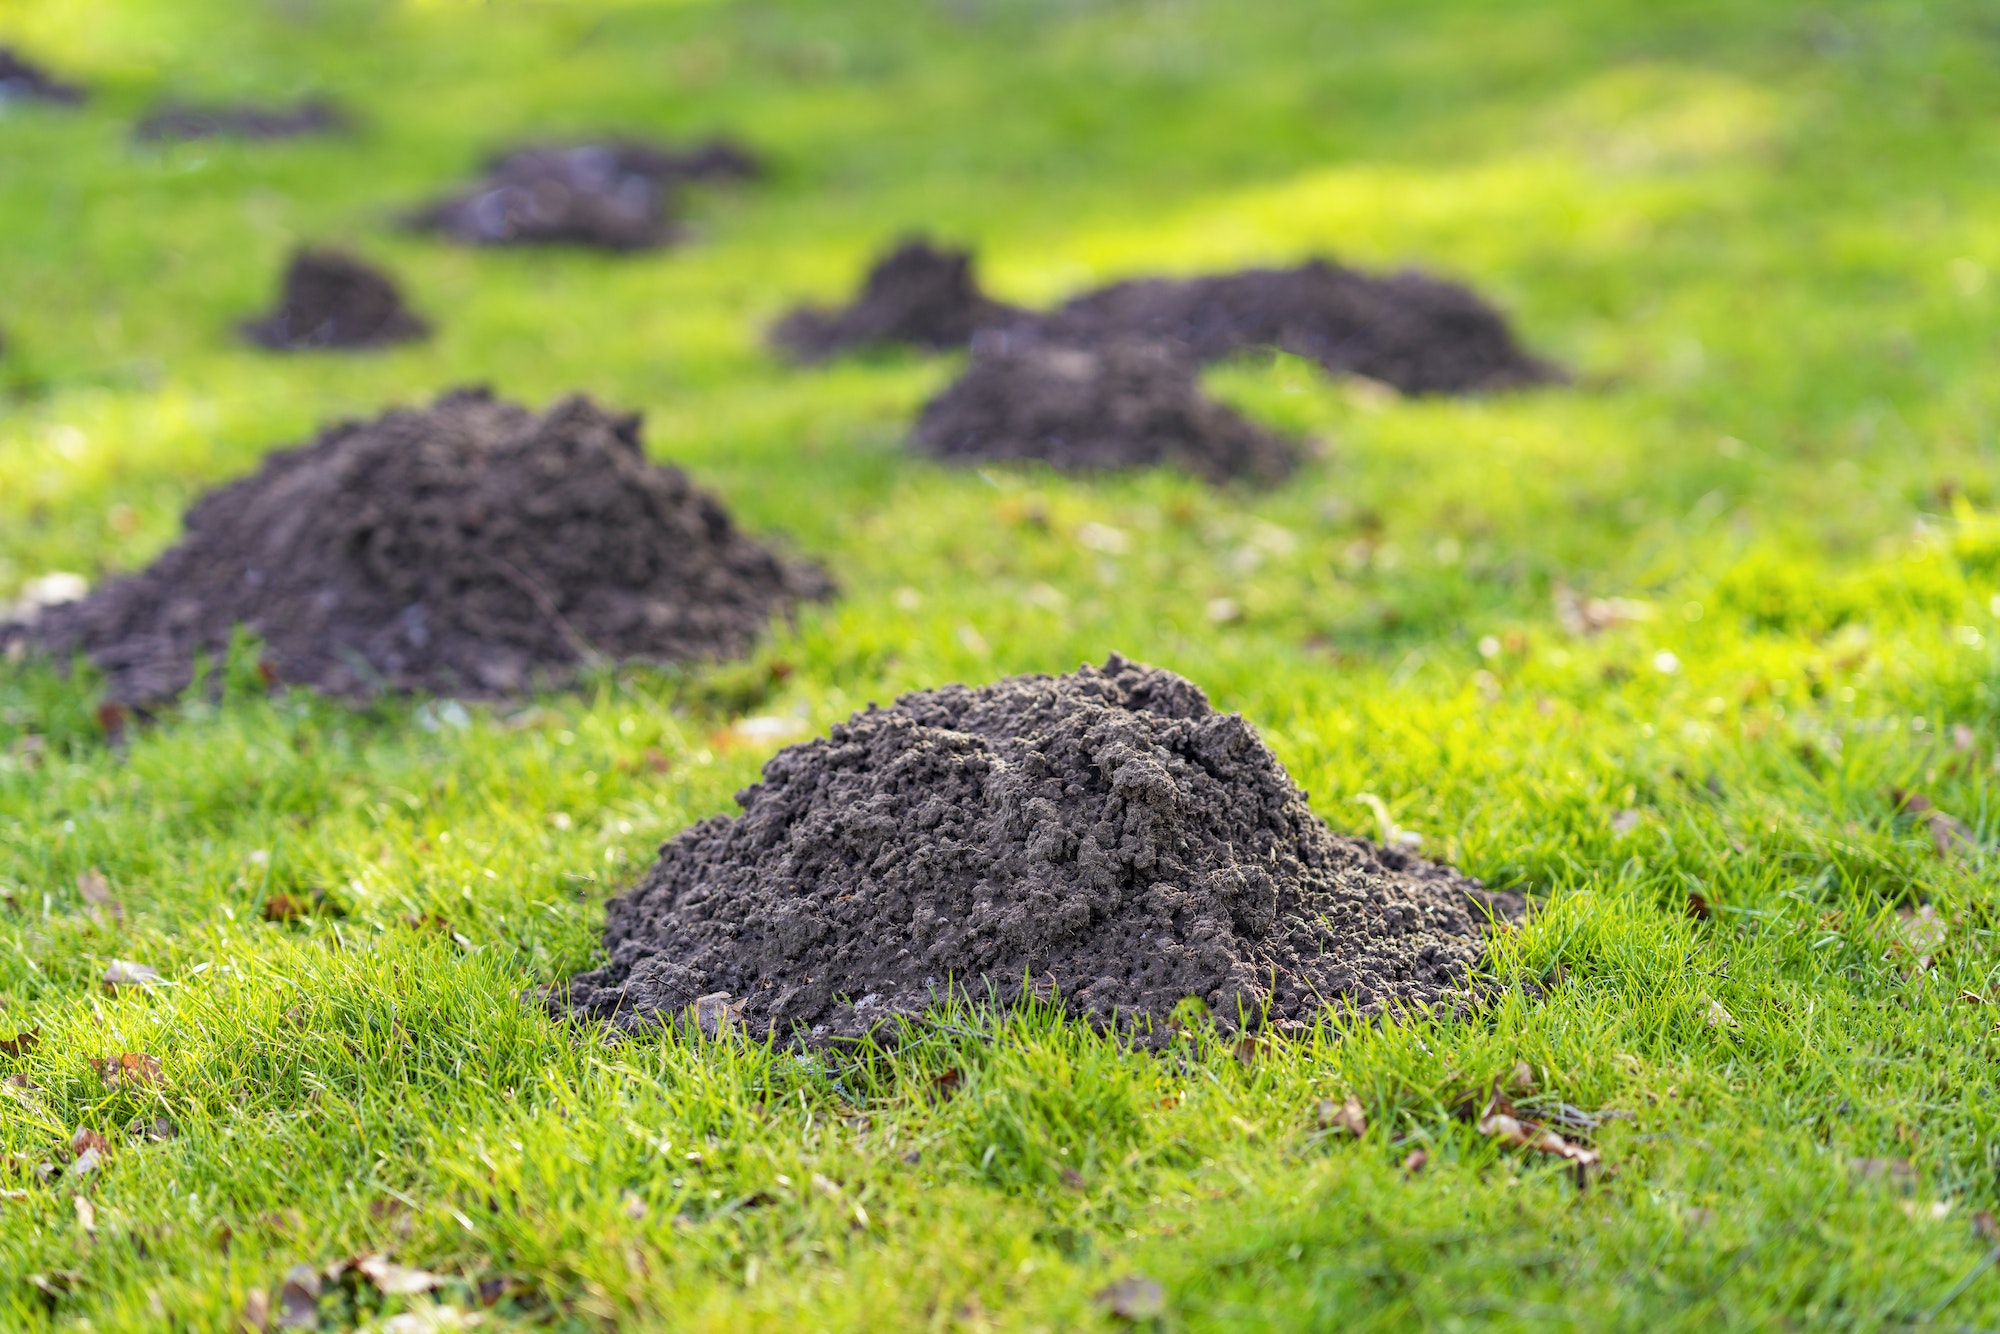 Lawn in the garden with mole hills